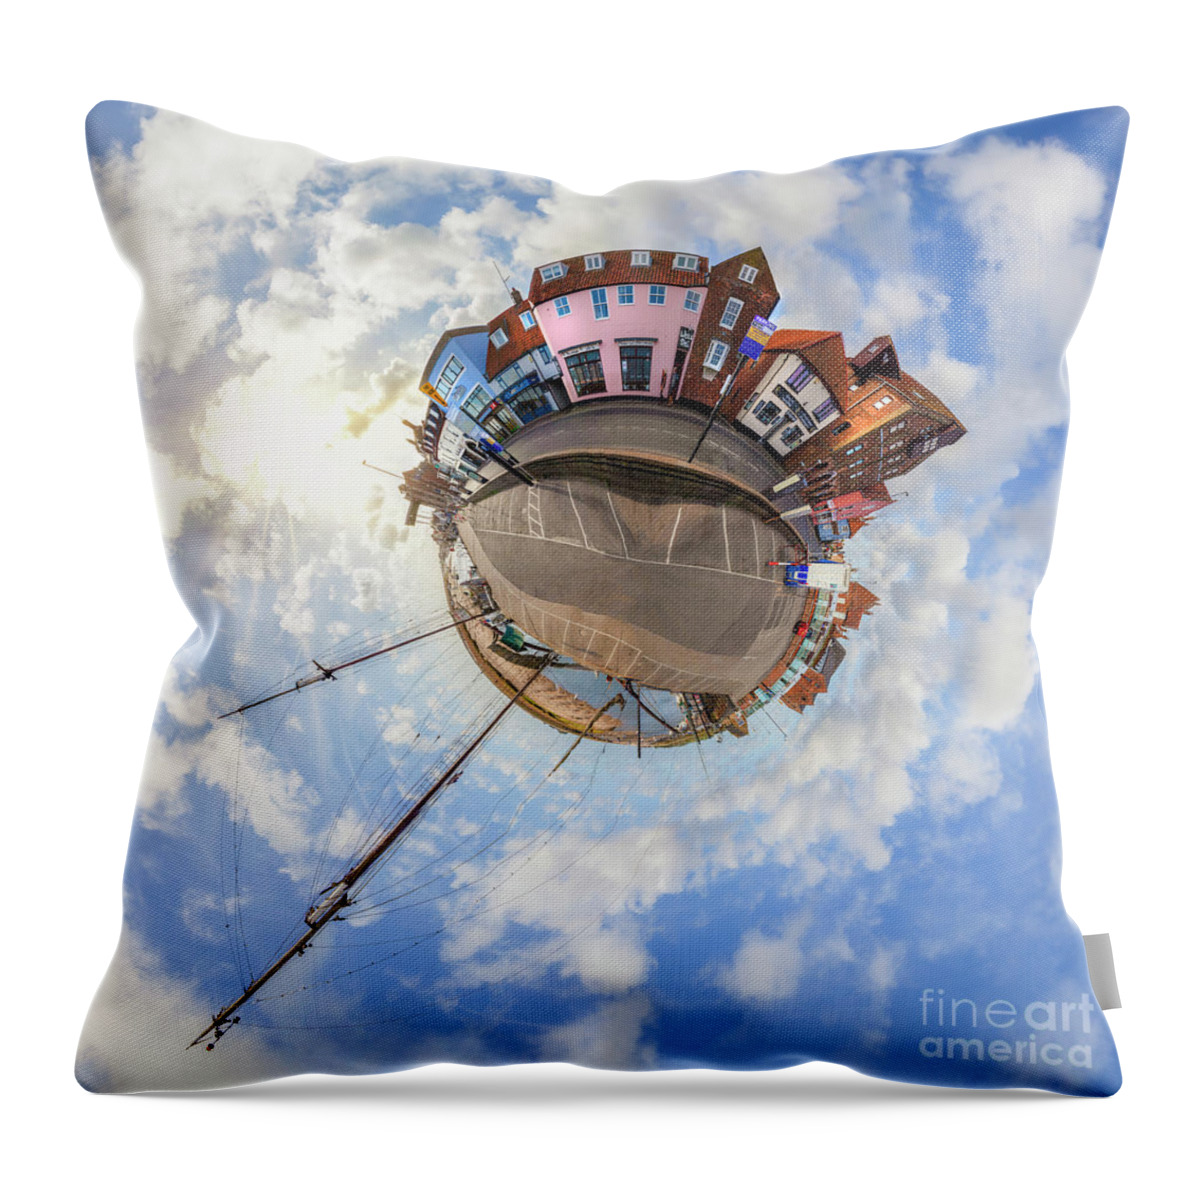 Wells Next The Sea Throw Pillow featuring the photograph Wells Next The Sea in Norfolk mini planet by Simon Bratt